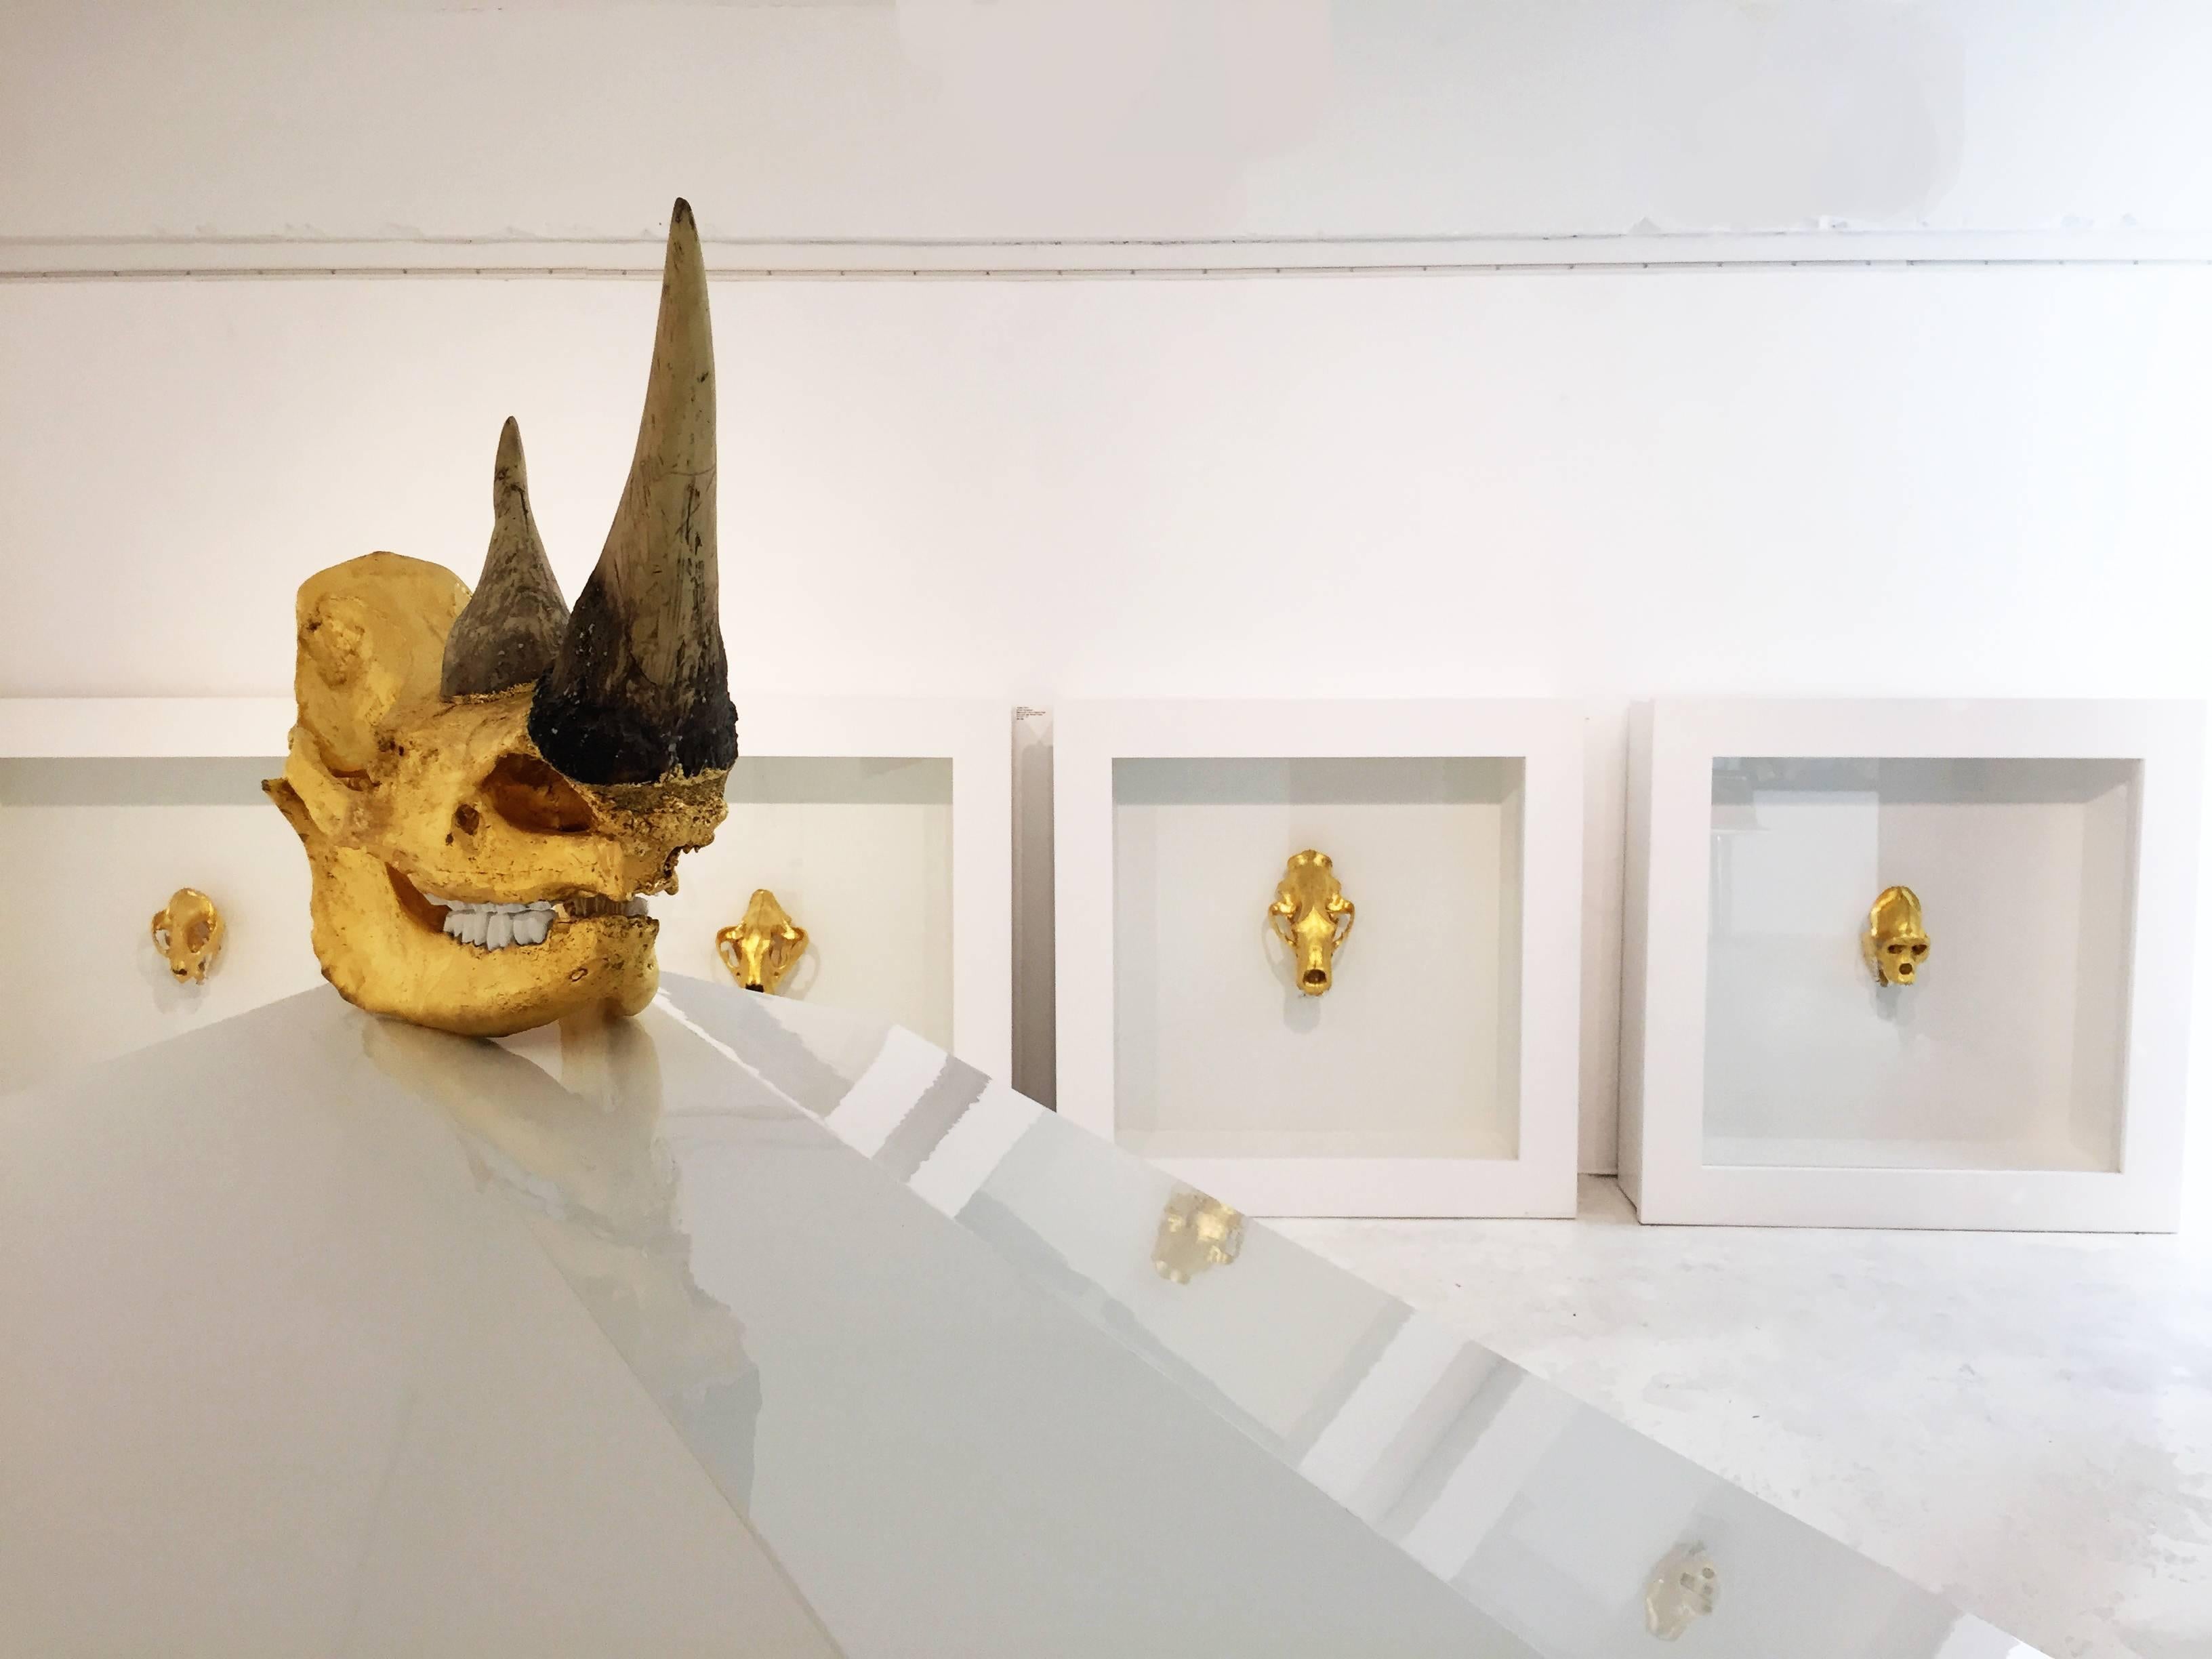 William Rosewood - Sudan 
Rhinoceros Skull Sculpture
Reproduction Skull of a White Rhino
24 K Gold Leaf
Edition: I/I
Dimensions Skull: 79 x 38 x 76 cm 
Dimensions of the Wooden Coffin: 226.1 × 121.9 × 200.7 cm
2015

“Sudan” (Name of the